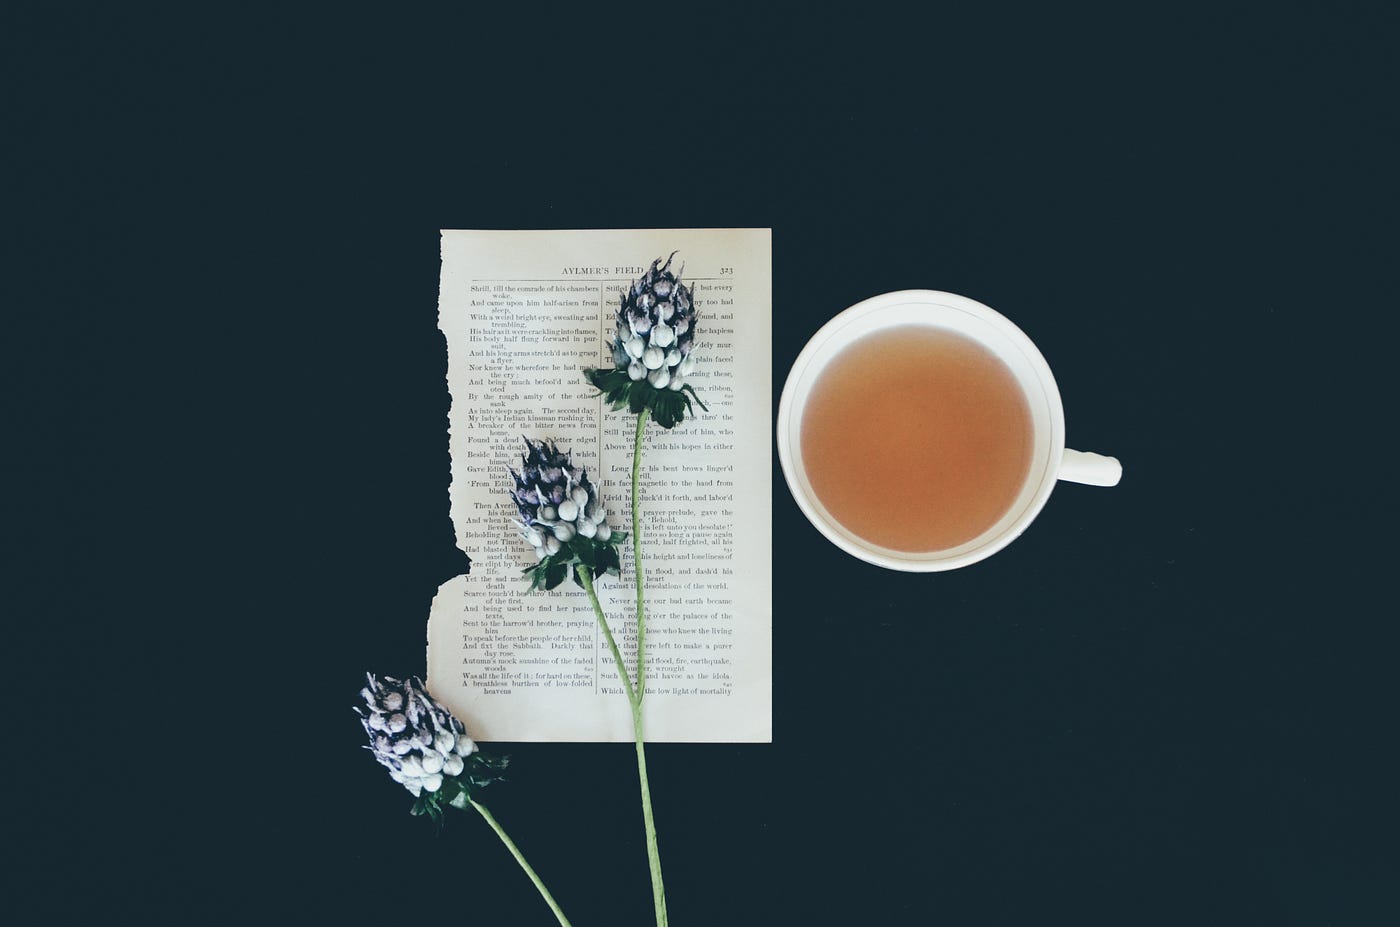 A torn piece of paper (with poetry) sits just to the left of midline. On top of the paper is a stem with three blue and white flowers coming off of it. To the right is a white cup, half-filled with light brown-colored tea. Black background underlies it all.